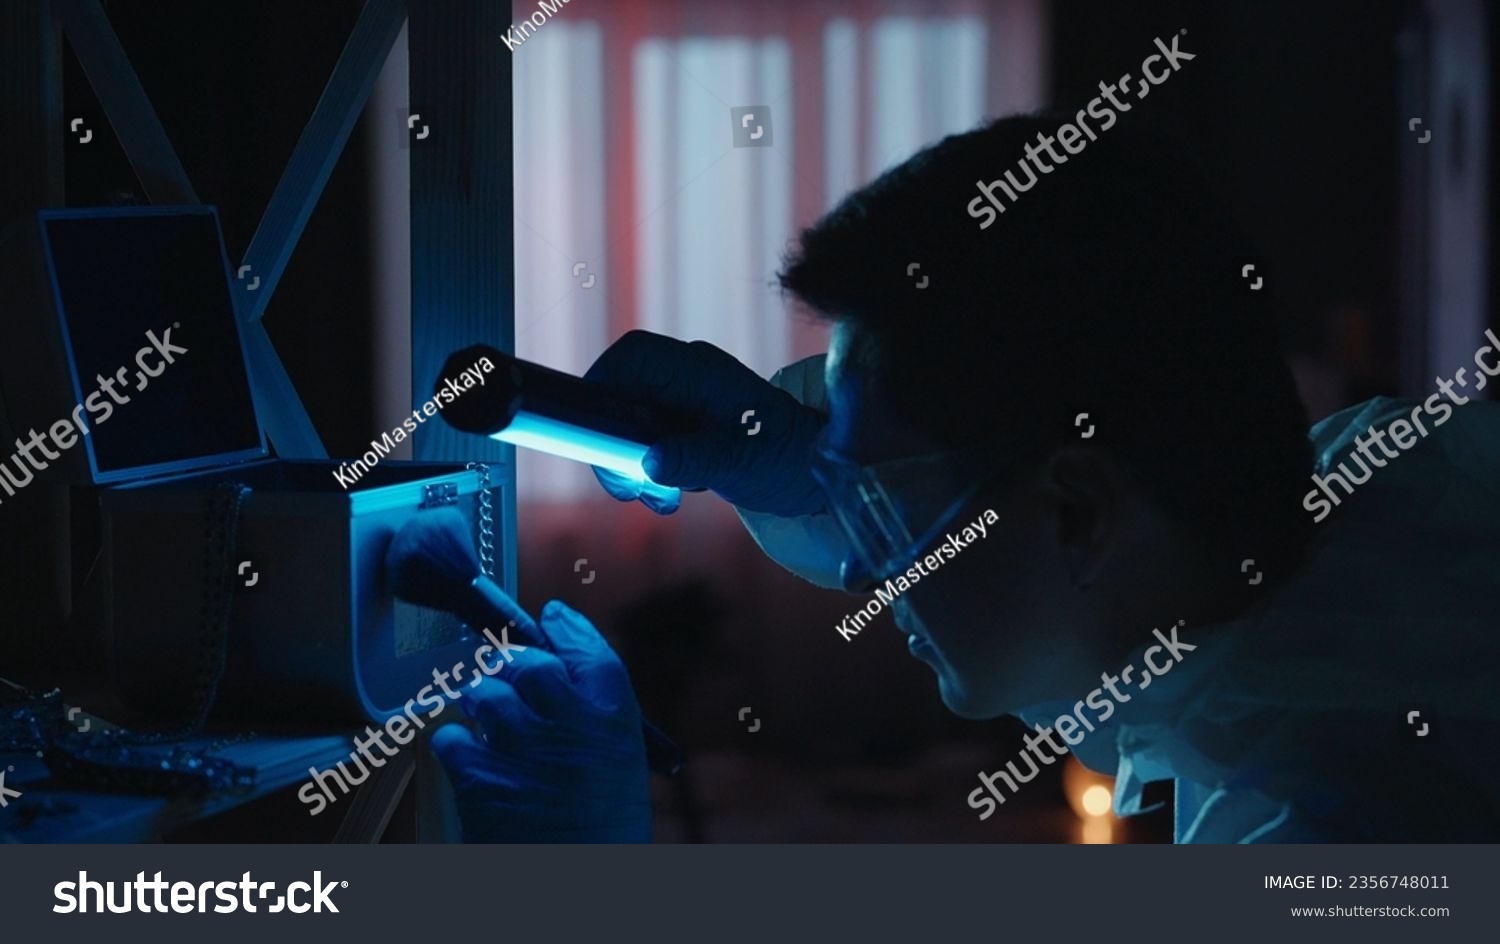 A male expert criminologist removes fingerprints from a jewelry box with a brush. A man gathers evidence using an ultraviolet lamp at a crime scene in a dark apartment lit by red, blue police sirens. #2356748011